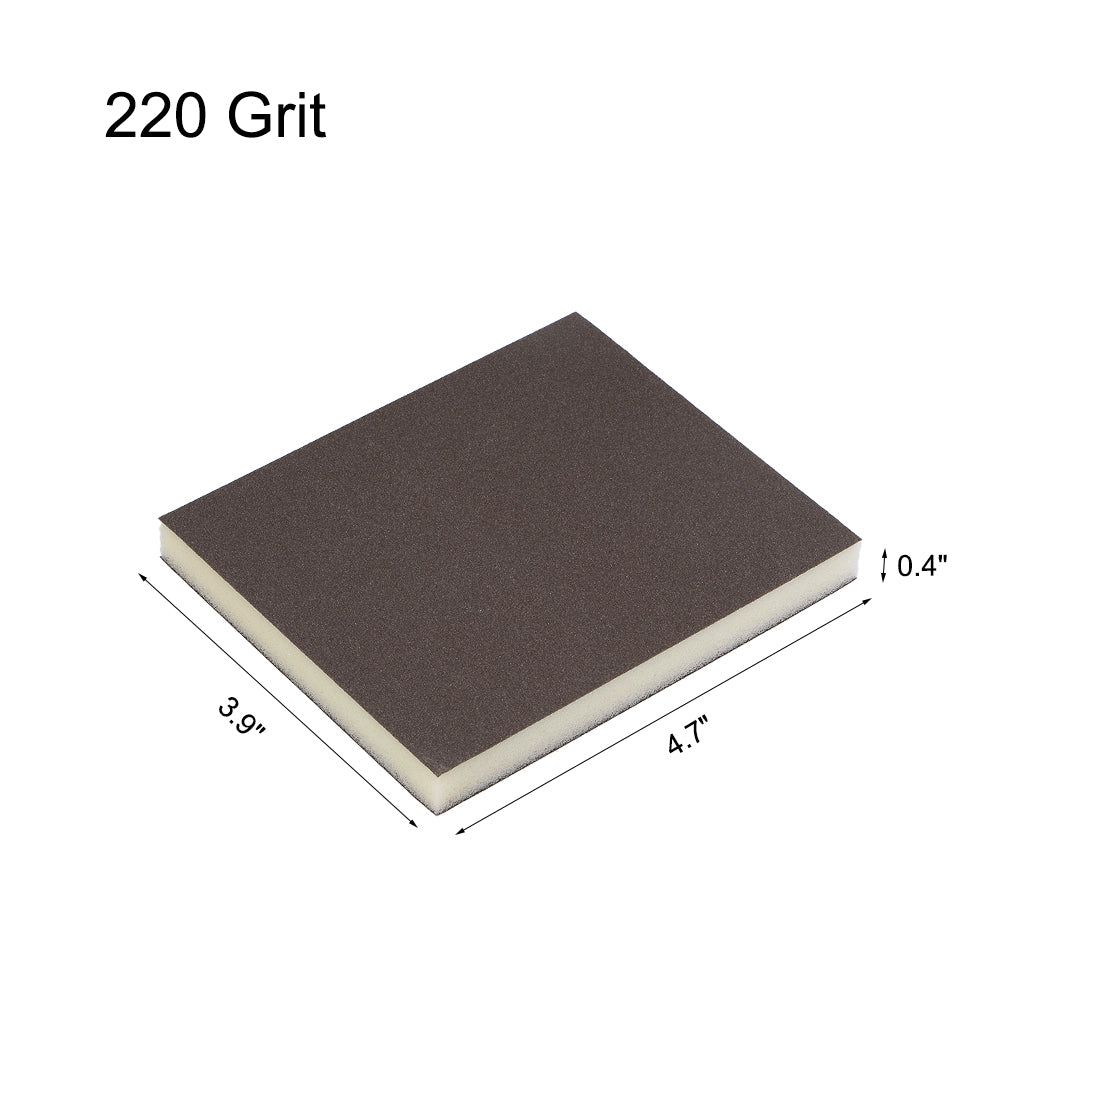 uxcell Uxcell Sanding Sponge 220 Grit Sanding Block Pad 4.7inch x 3.9inch x 0.4inch Brown 6pcs